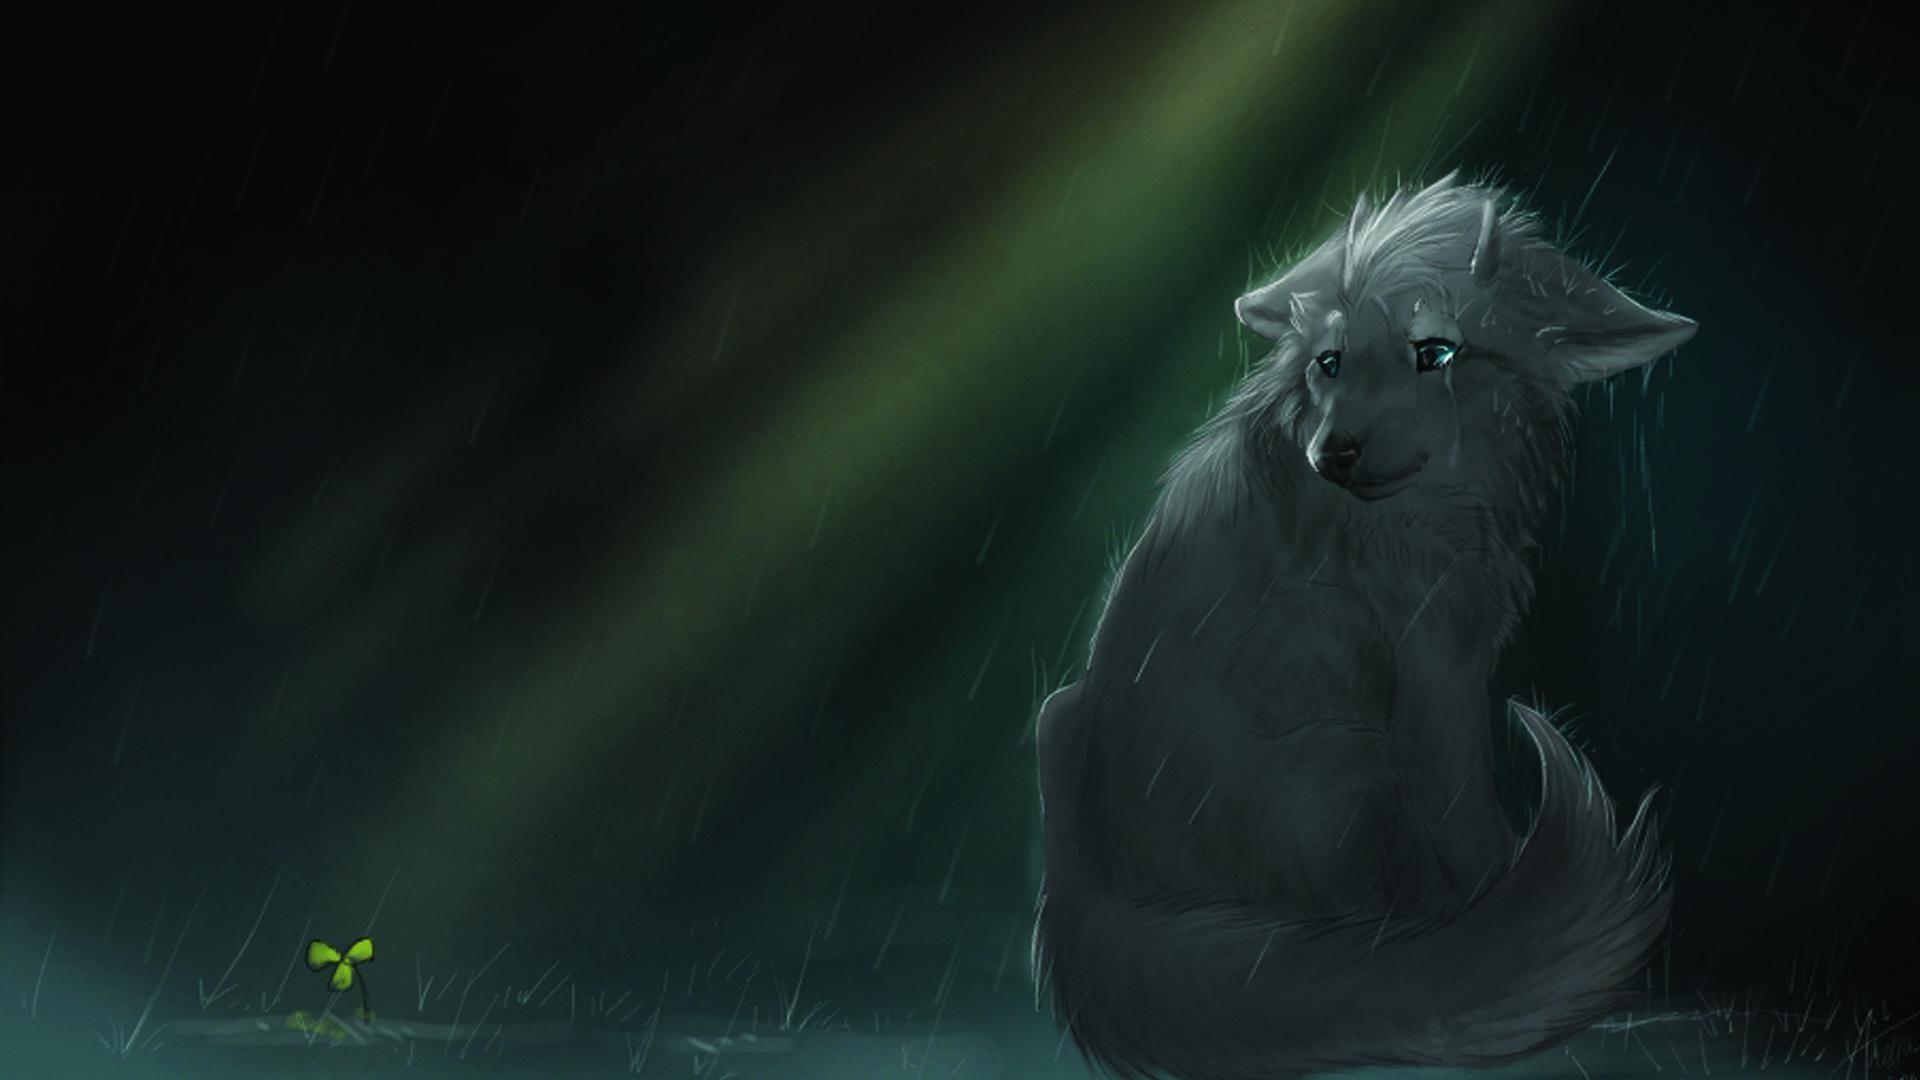 Anime Wolf Wallpaper. Anime Wolves. Anime wolf